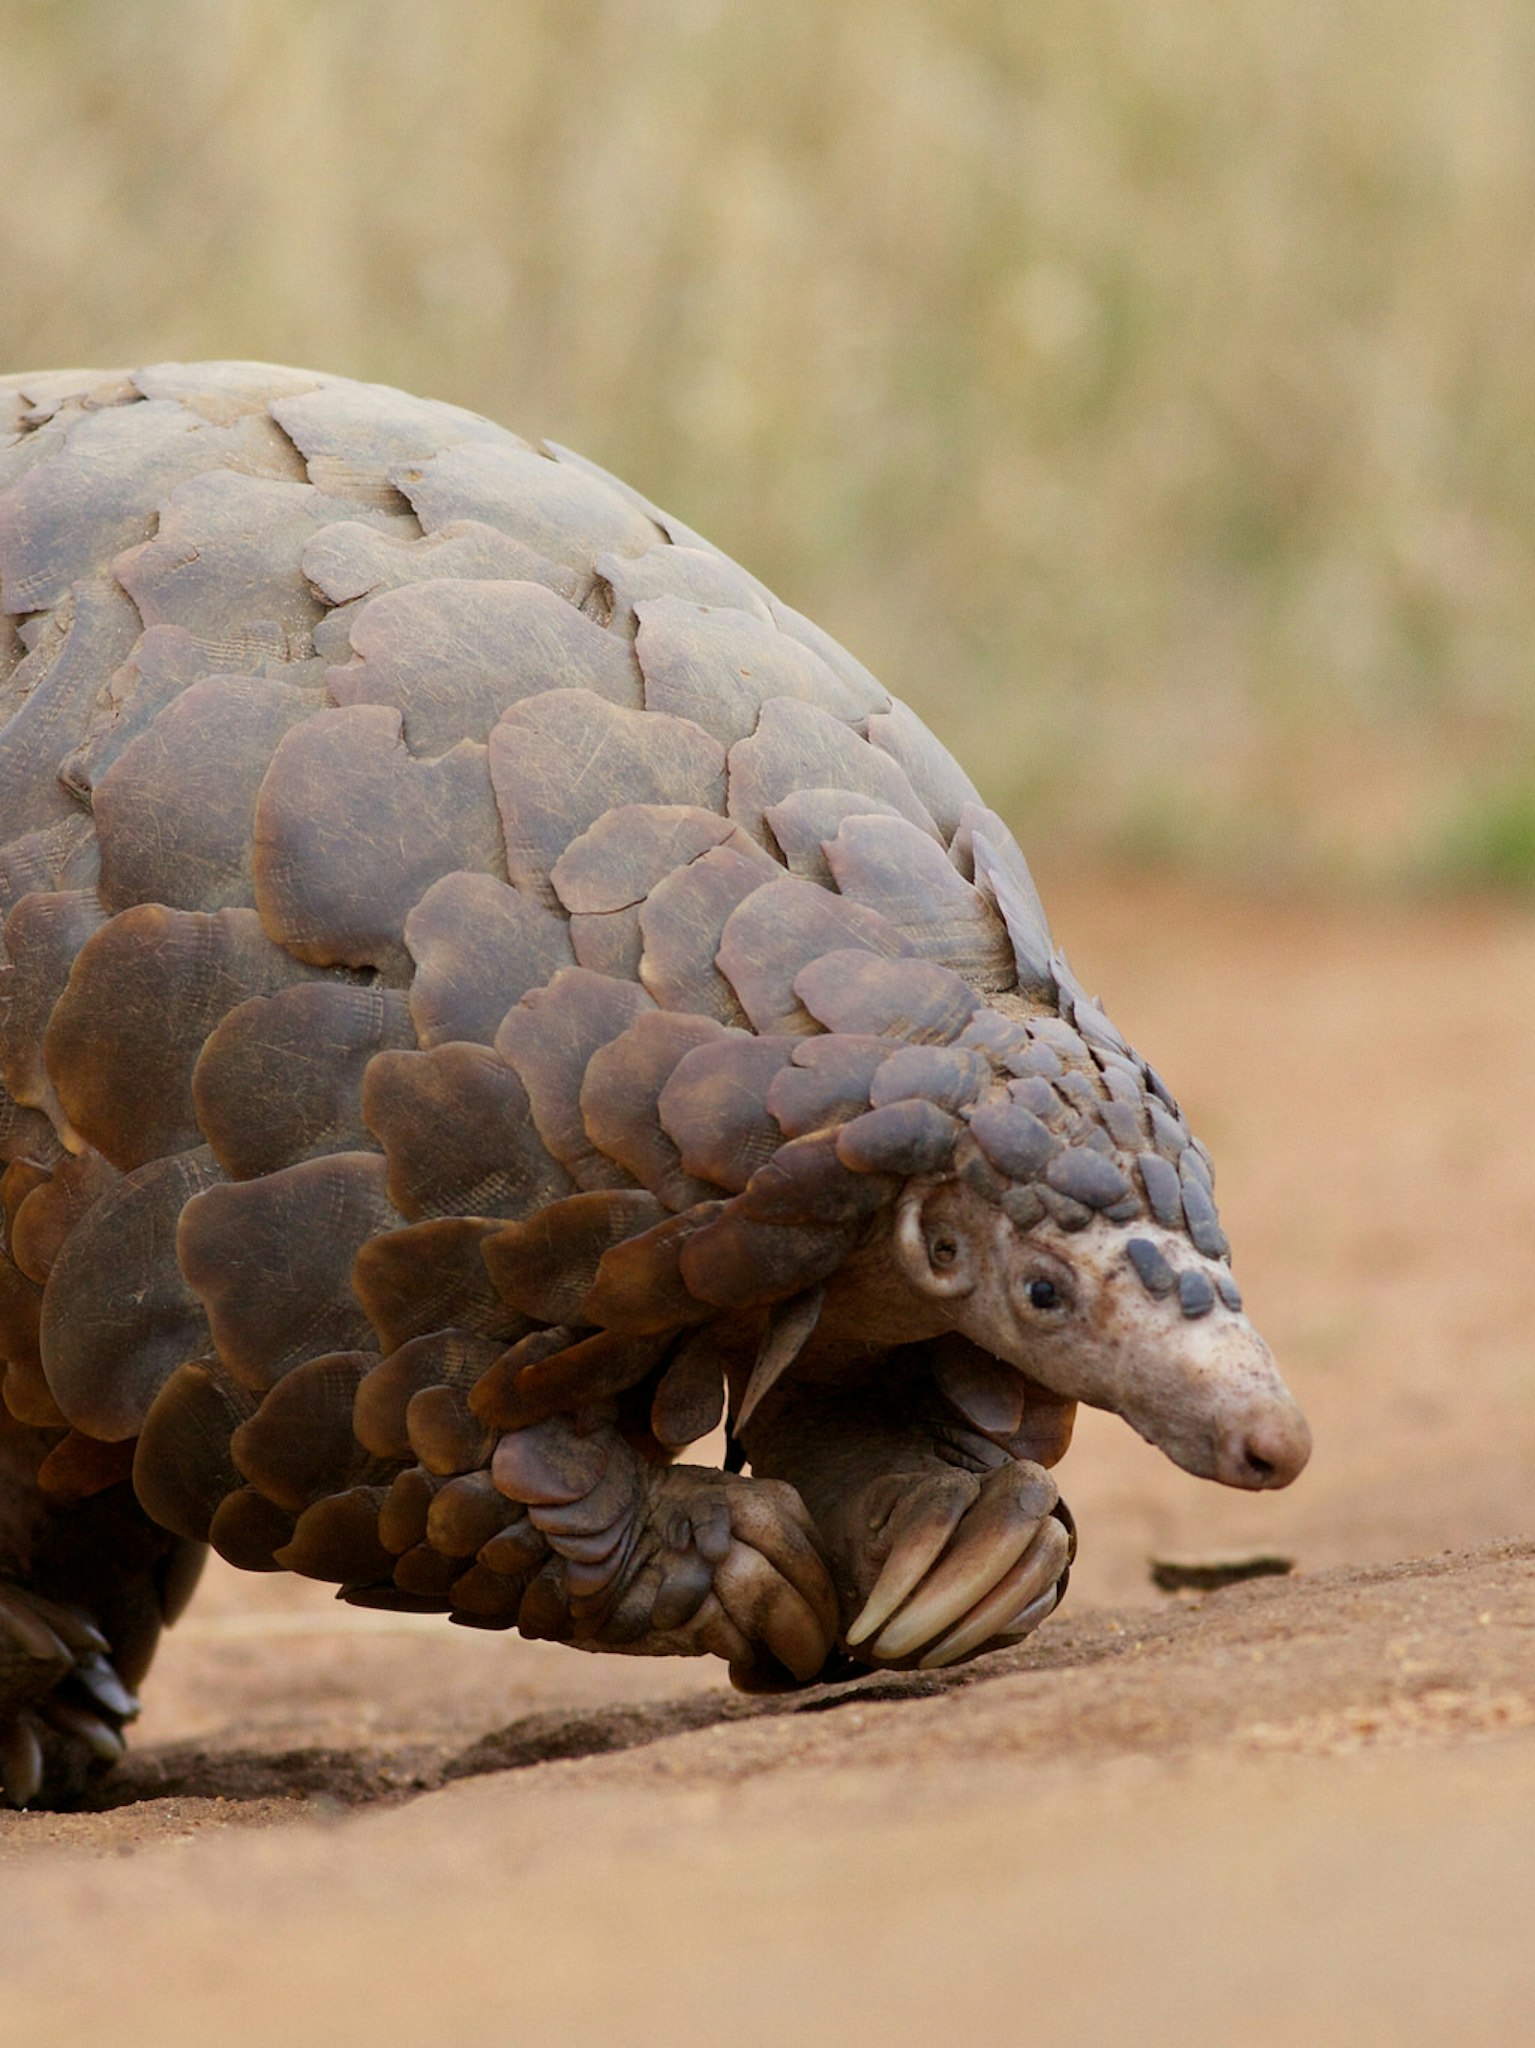 The Pangolin Is Scaly, Weird, Cute, and the Most Poached Mammal on Earth | Inverse1535 x 2048